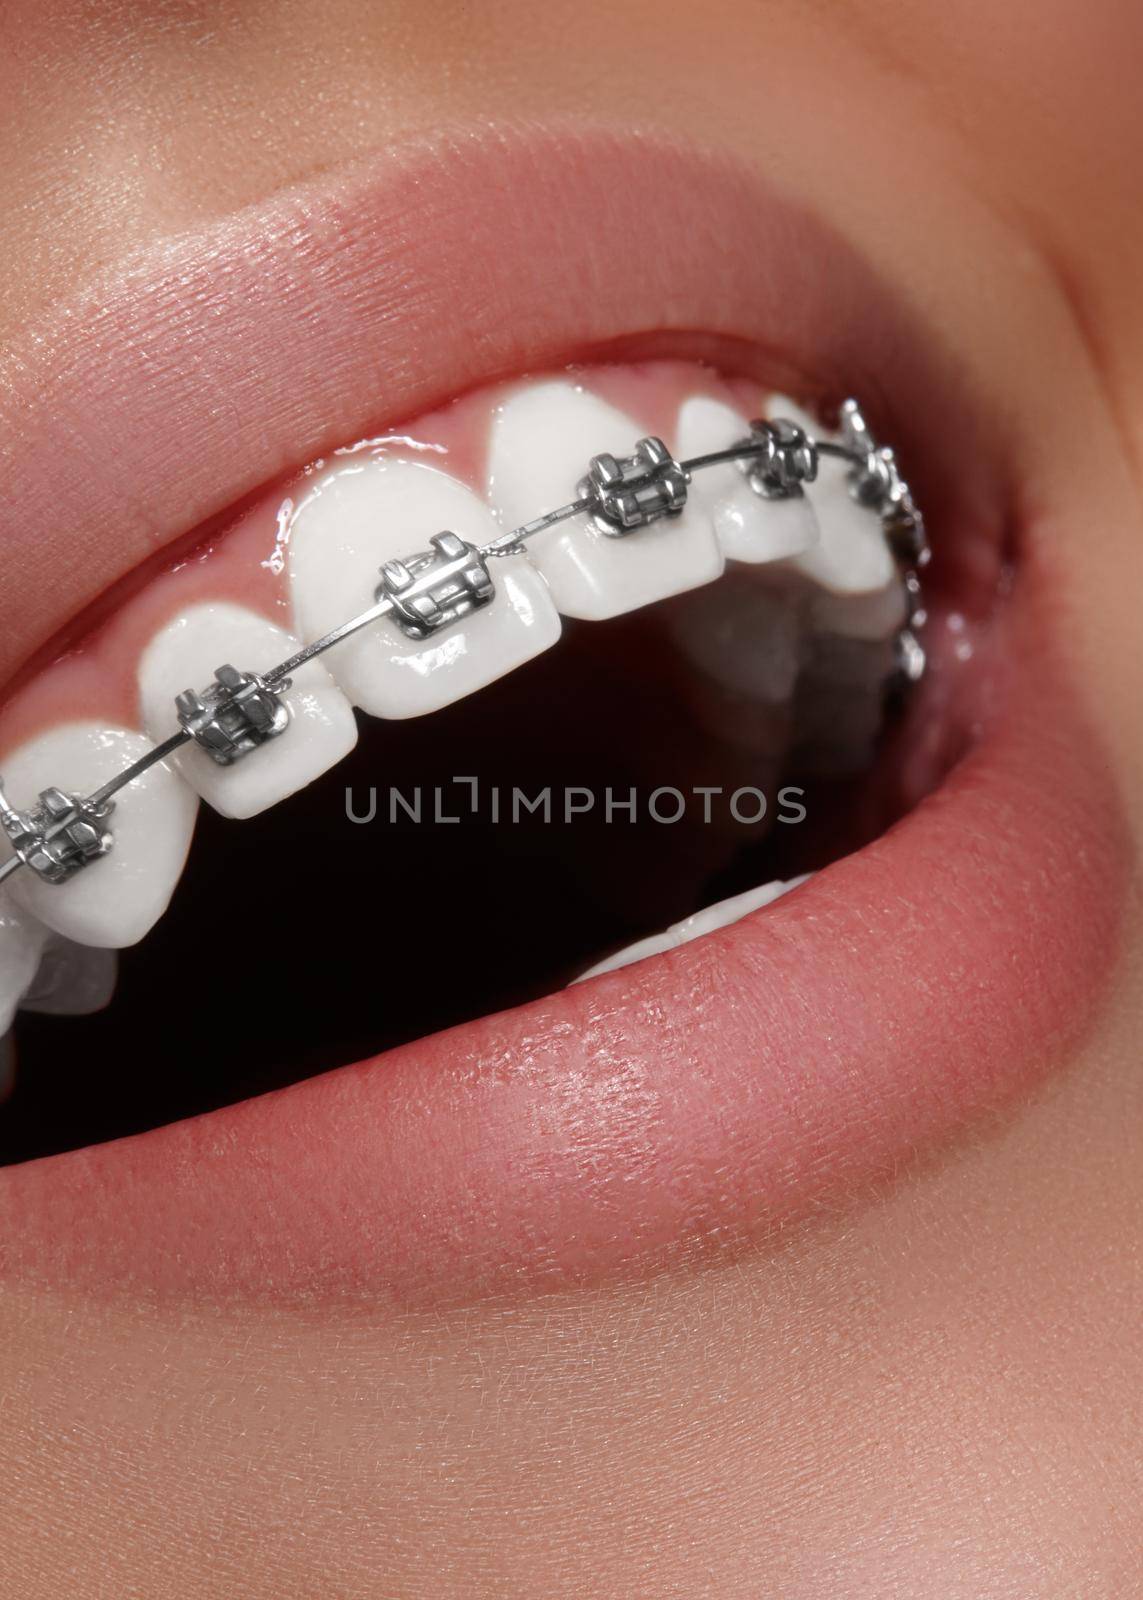 Beautiful macro shot of white teeth with braces. Dental care photo. Beauty woman smile with ortodontic accessories. Orthodontics treatment. Closeup of healthy female mouth